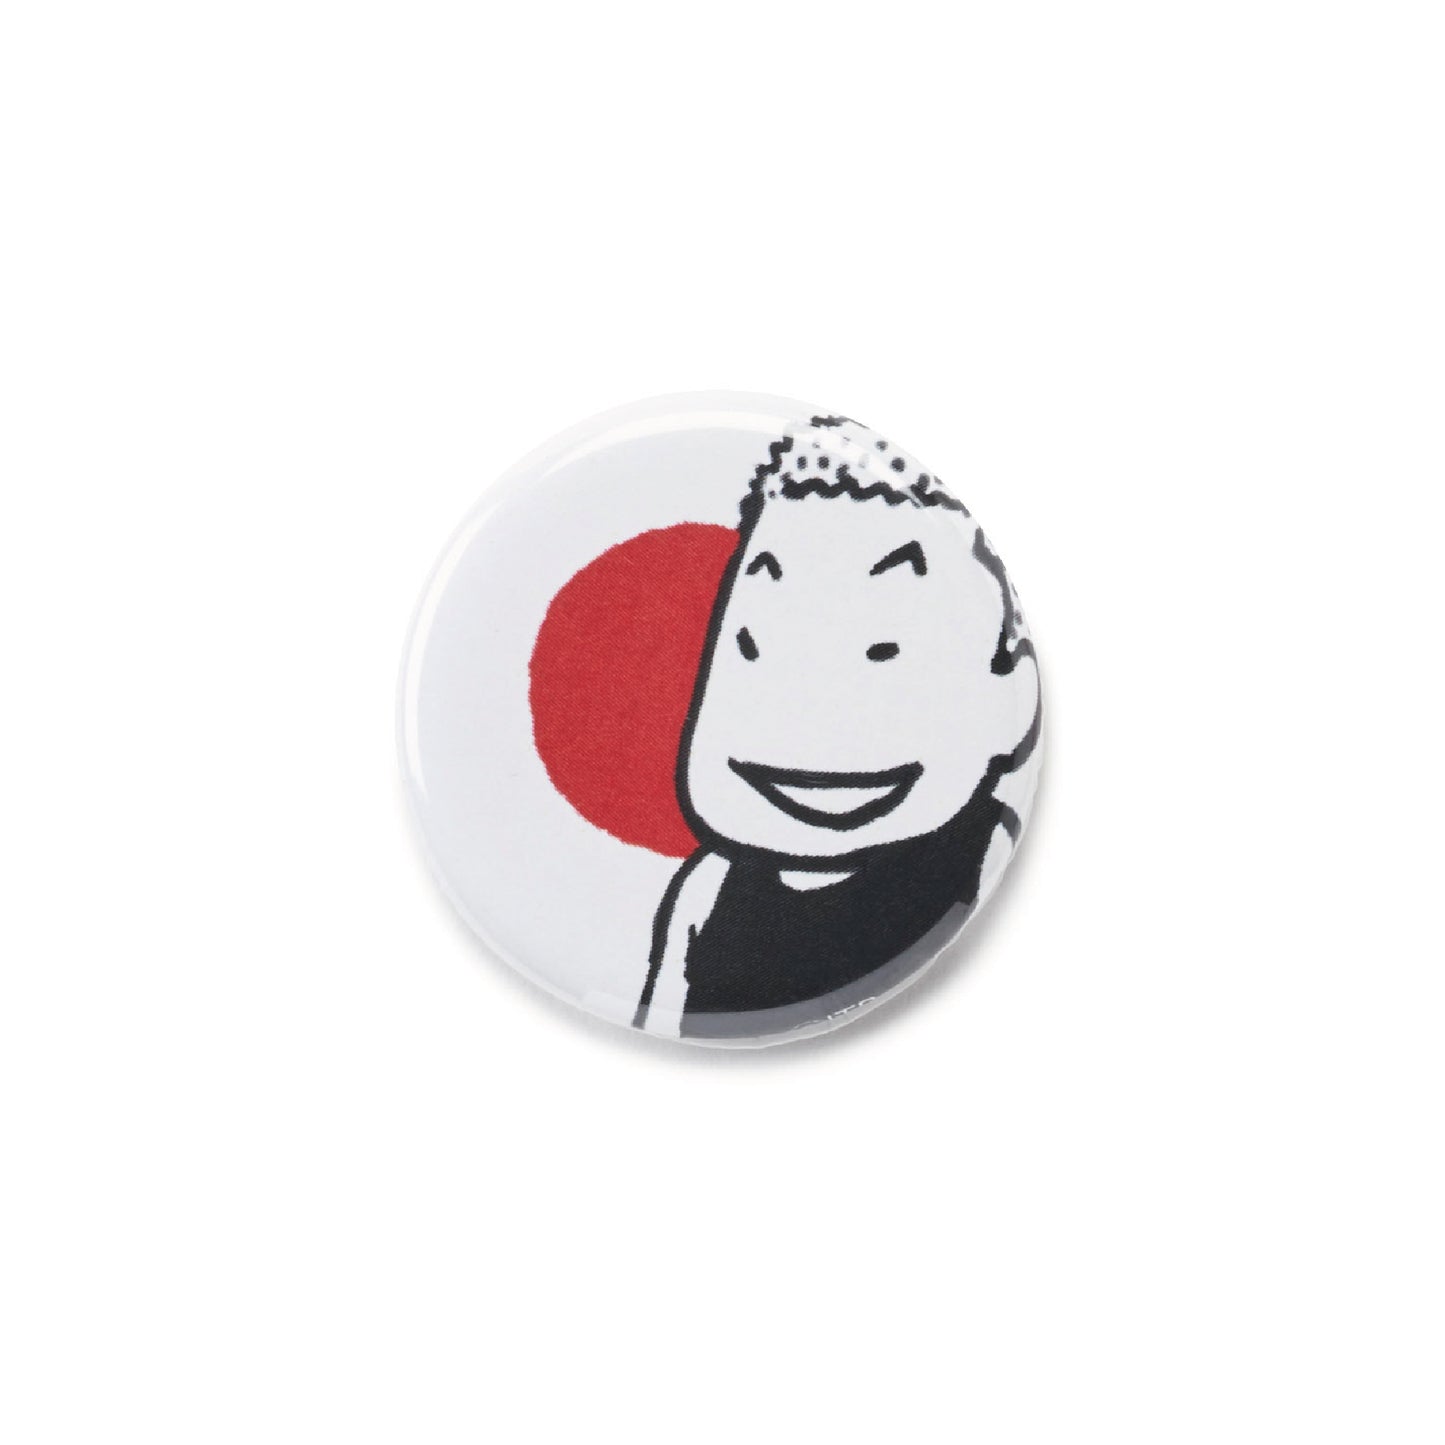 Button badge the Japanese flag